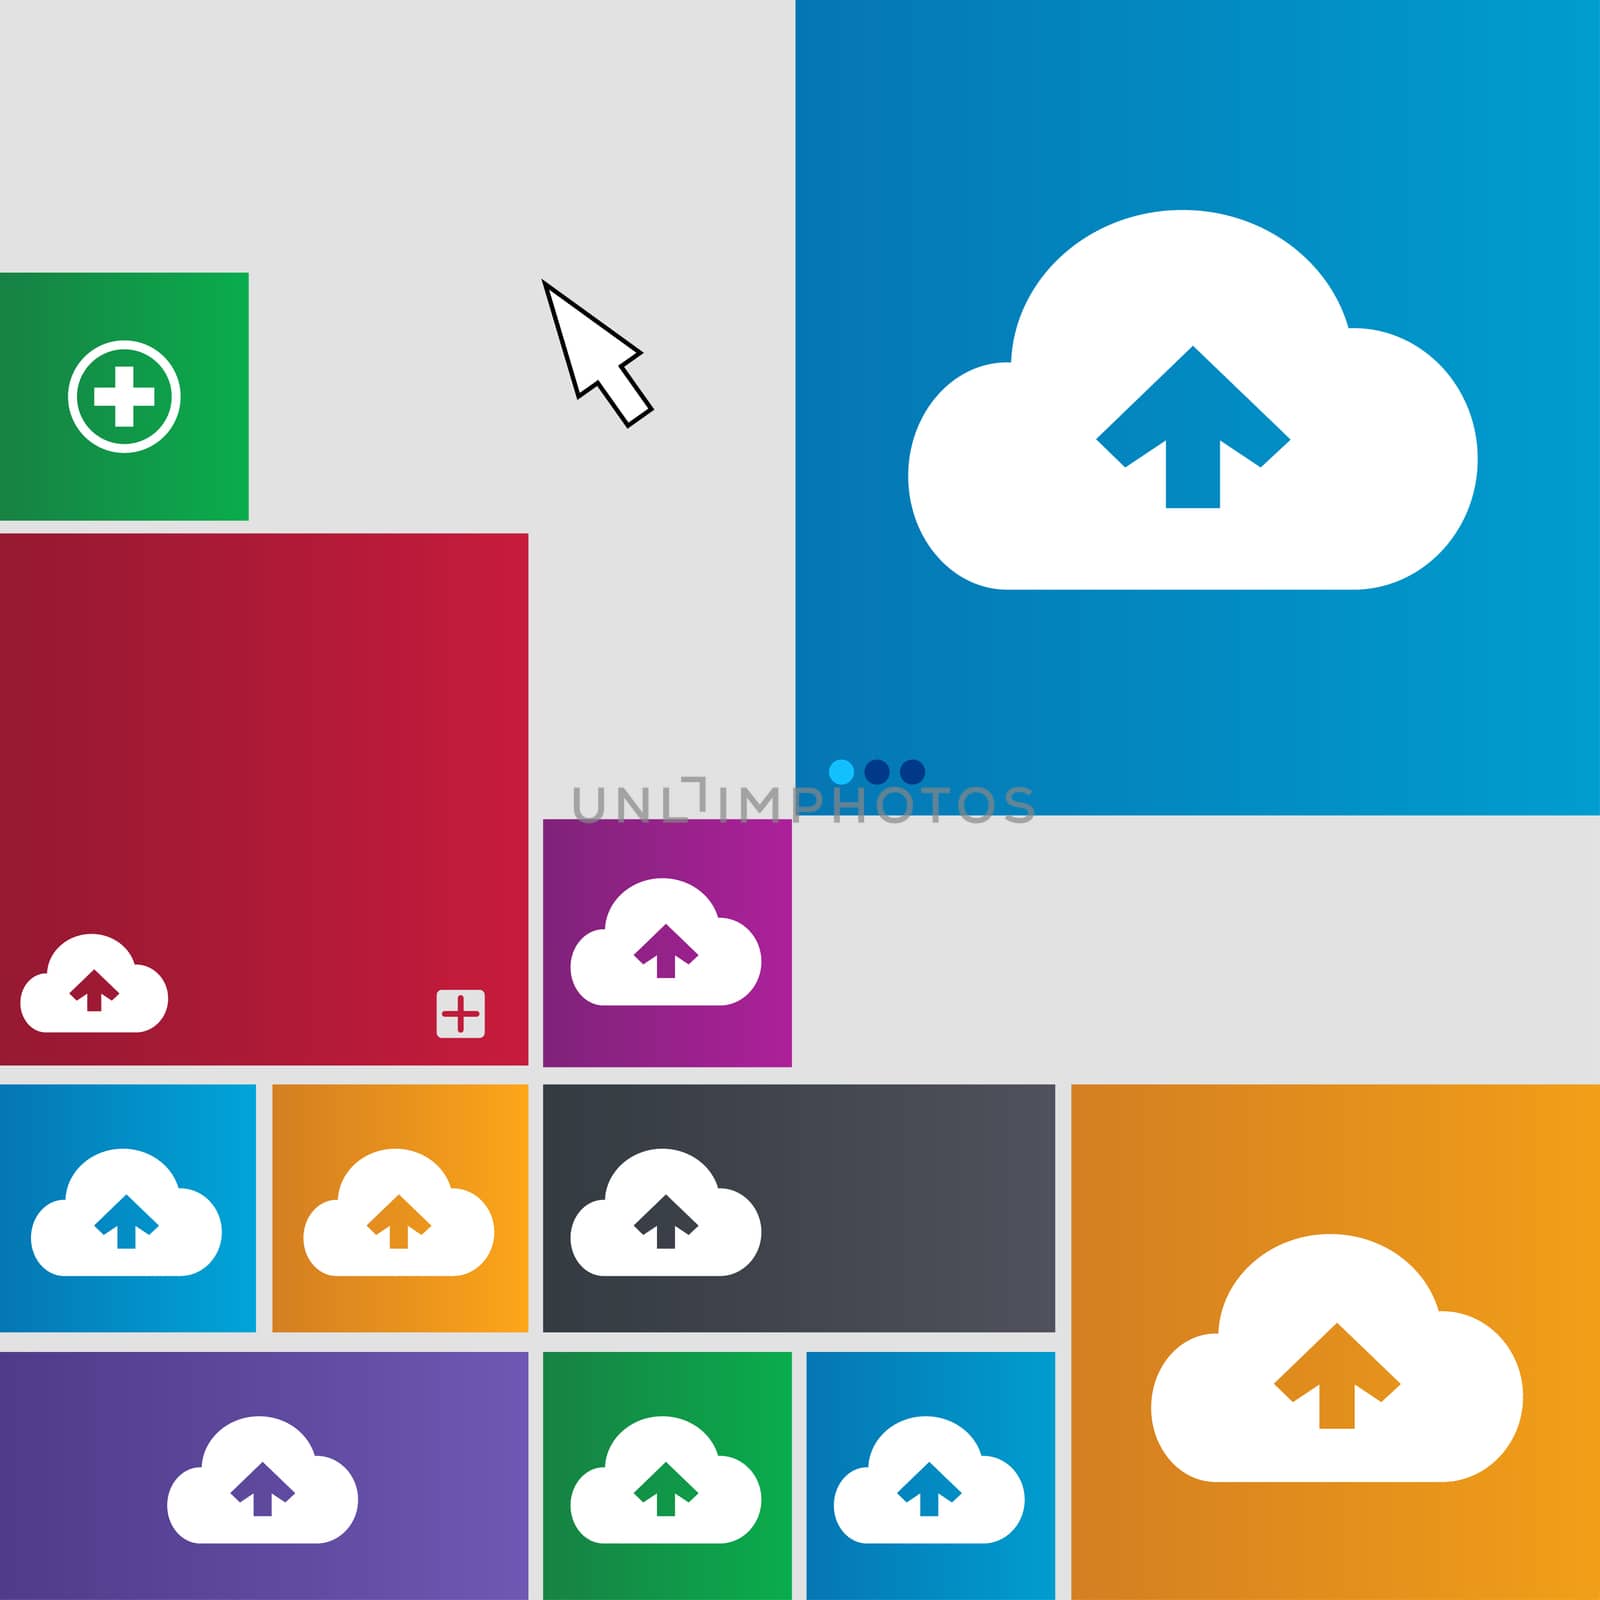 Upload from cloud icon sign. Metro style buttons. Modern interface website buttons with cursor pointer. illustration